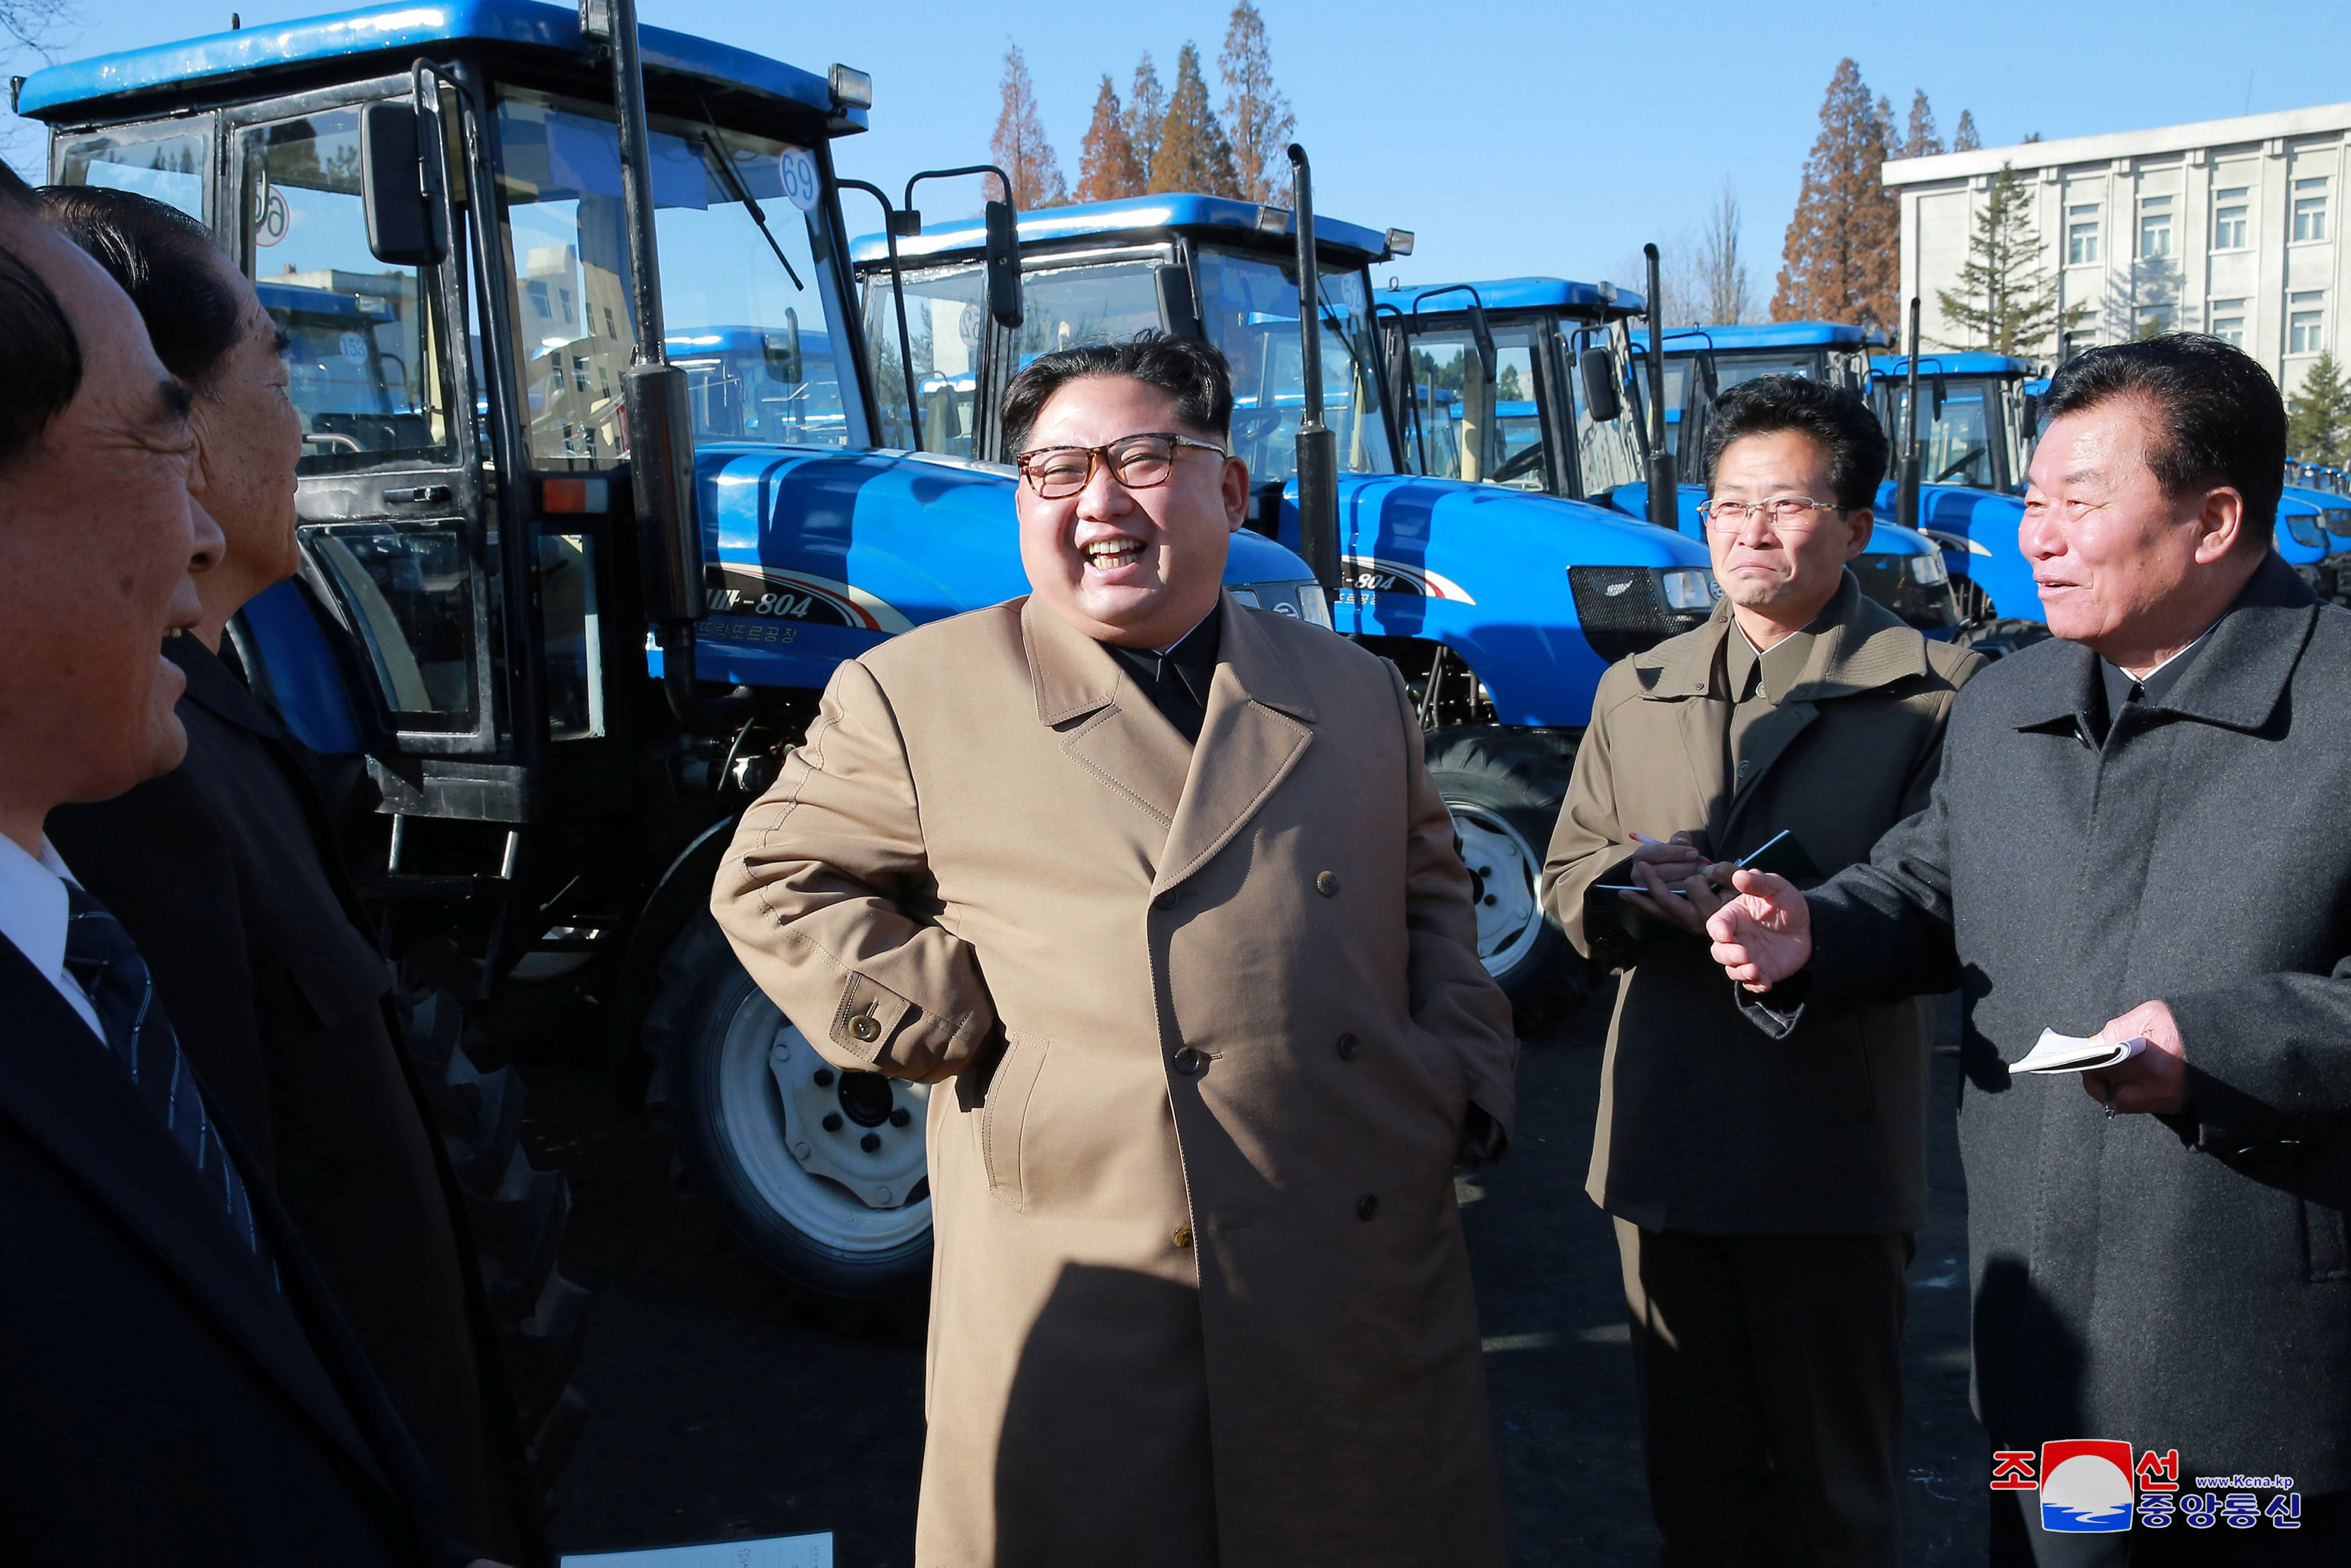 North Korea's Kim Jong Un trades missiles for tractors during testing lull